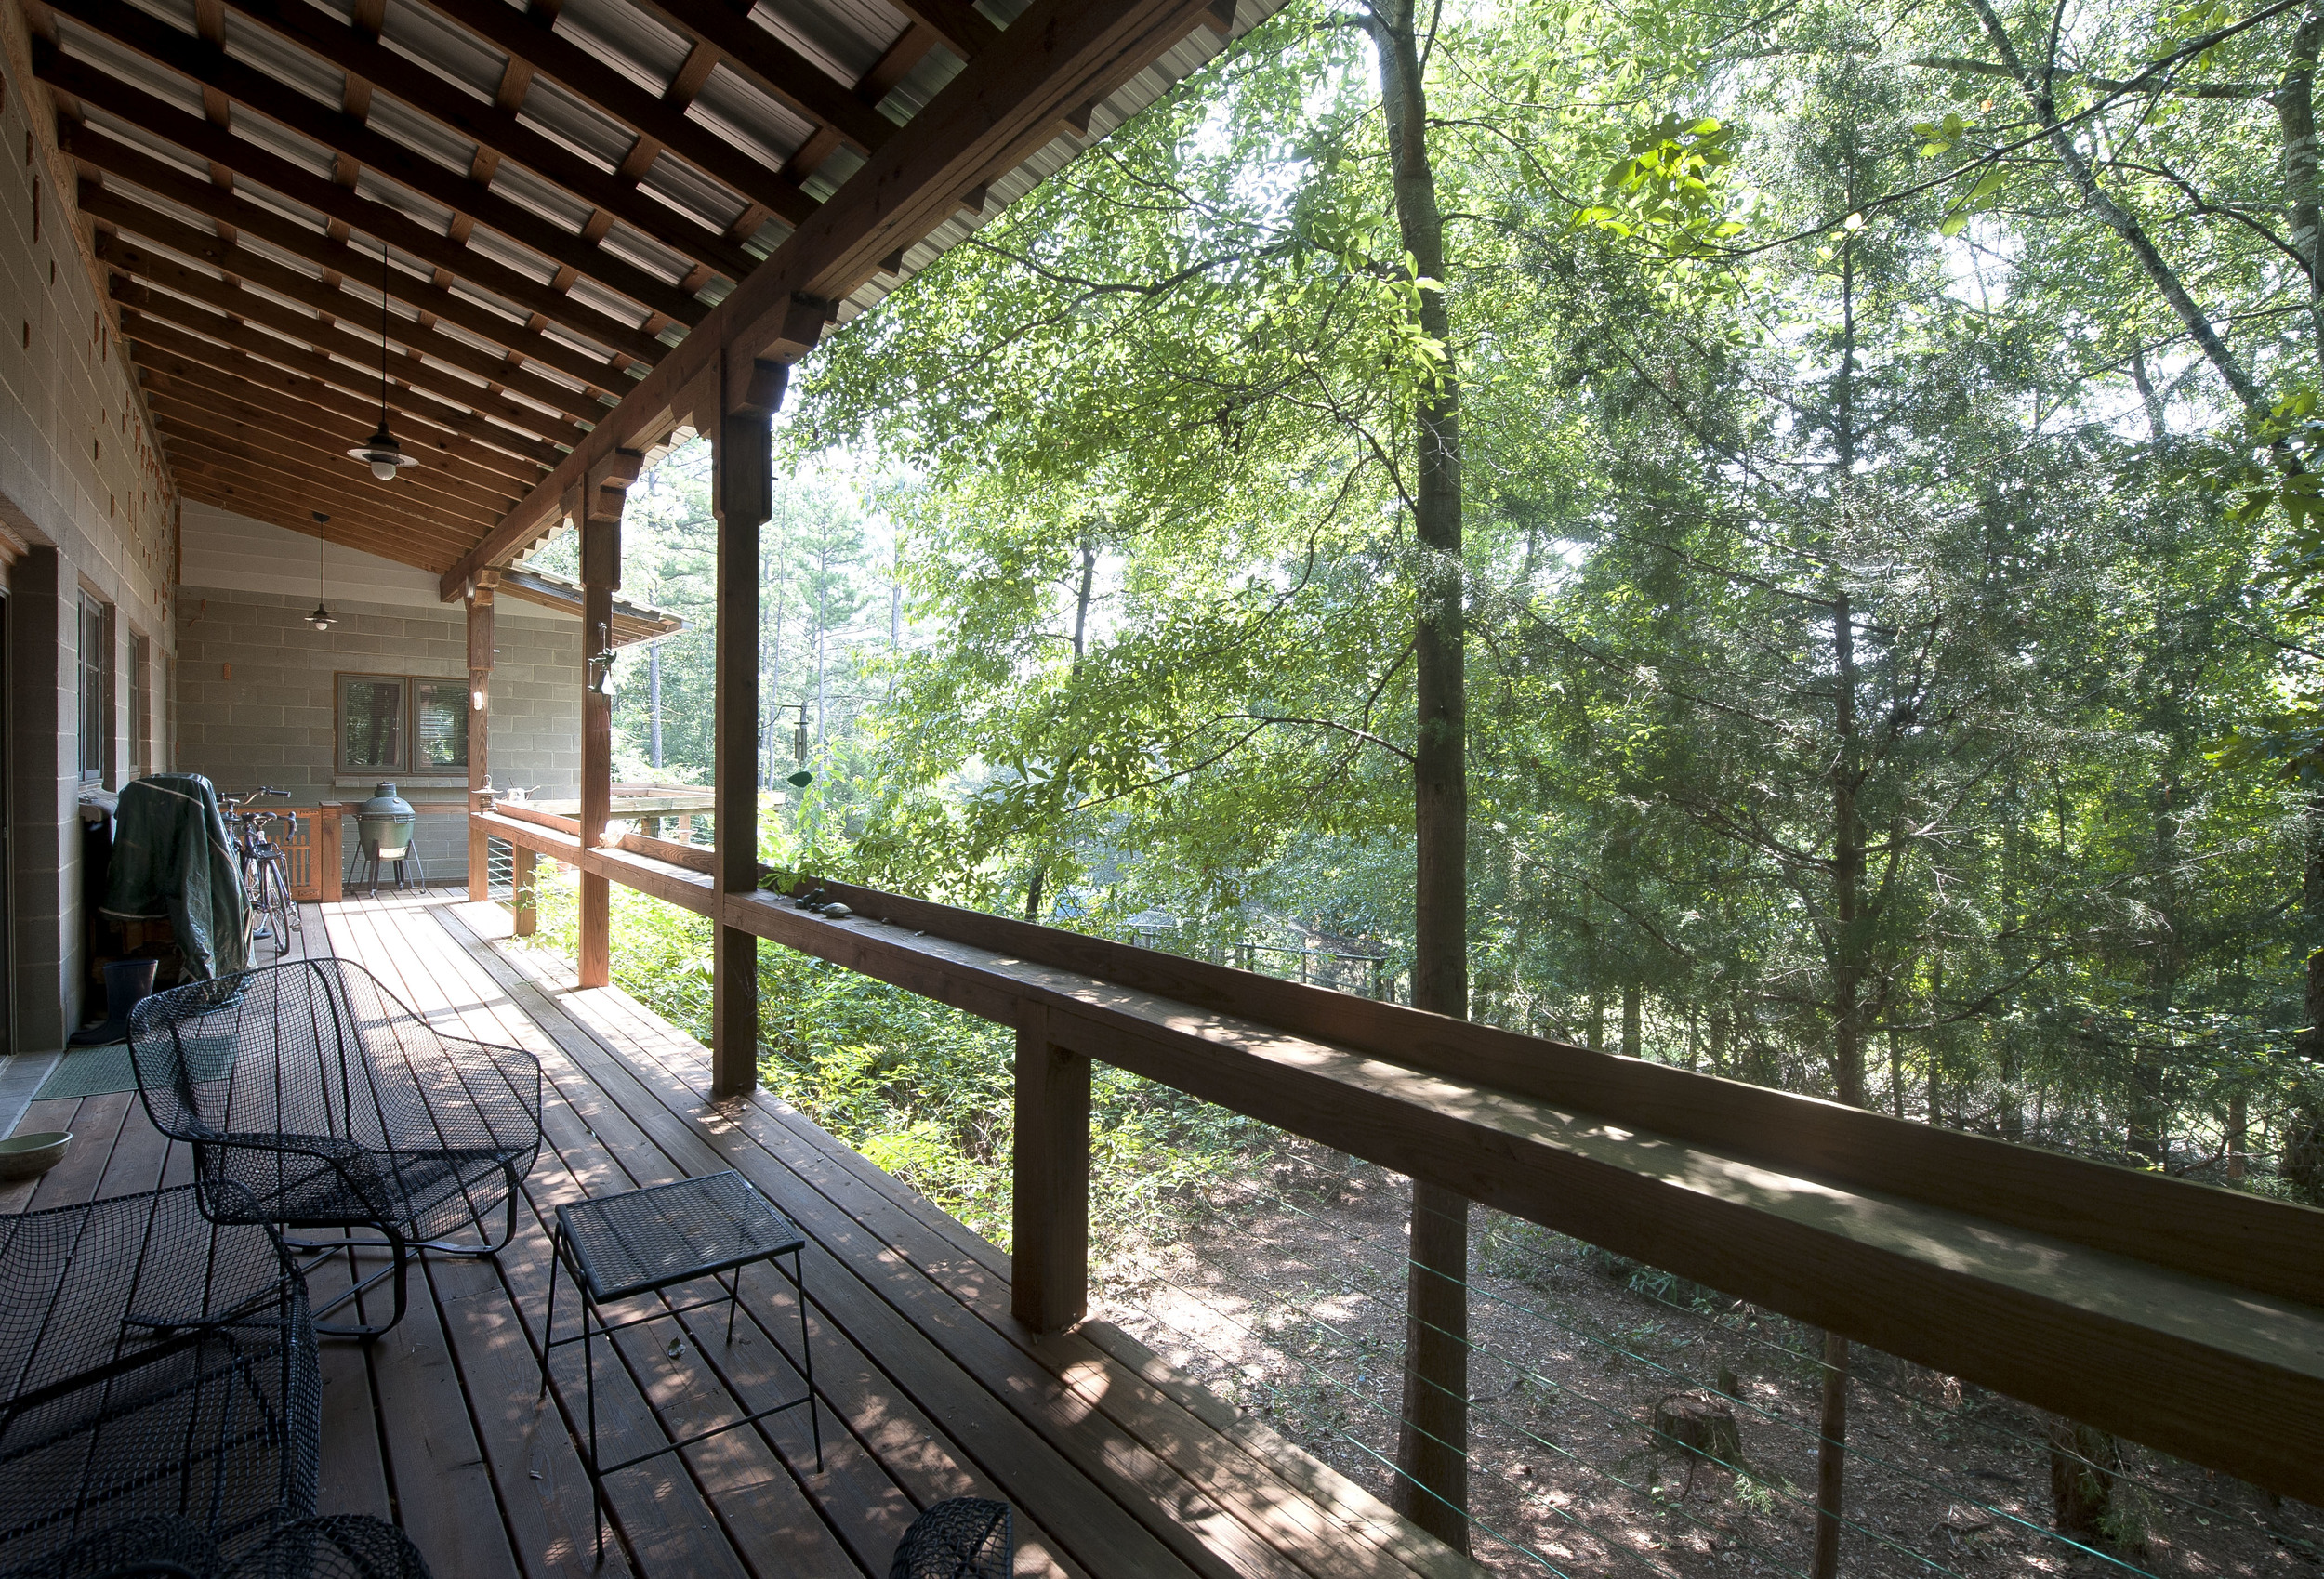 Covered back porch has a beautiful view of woods.